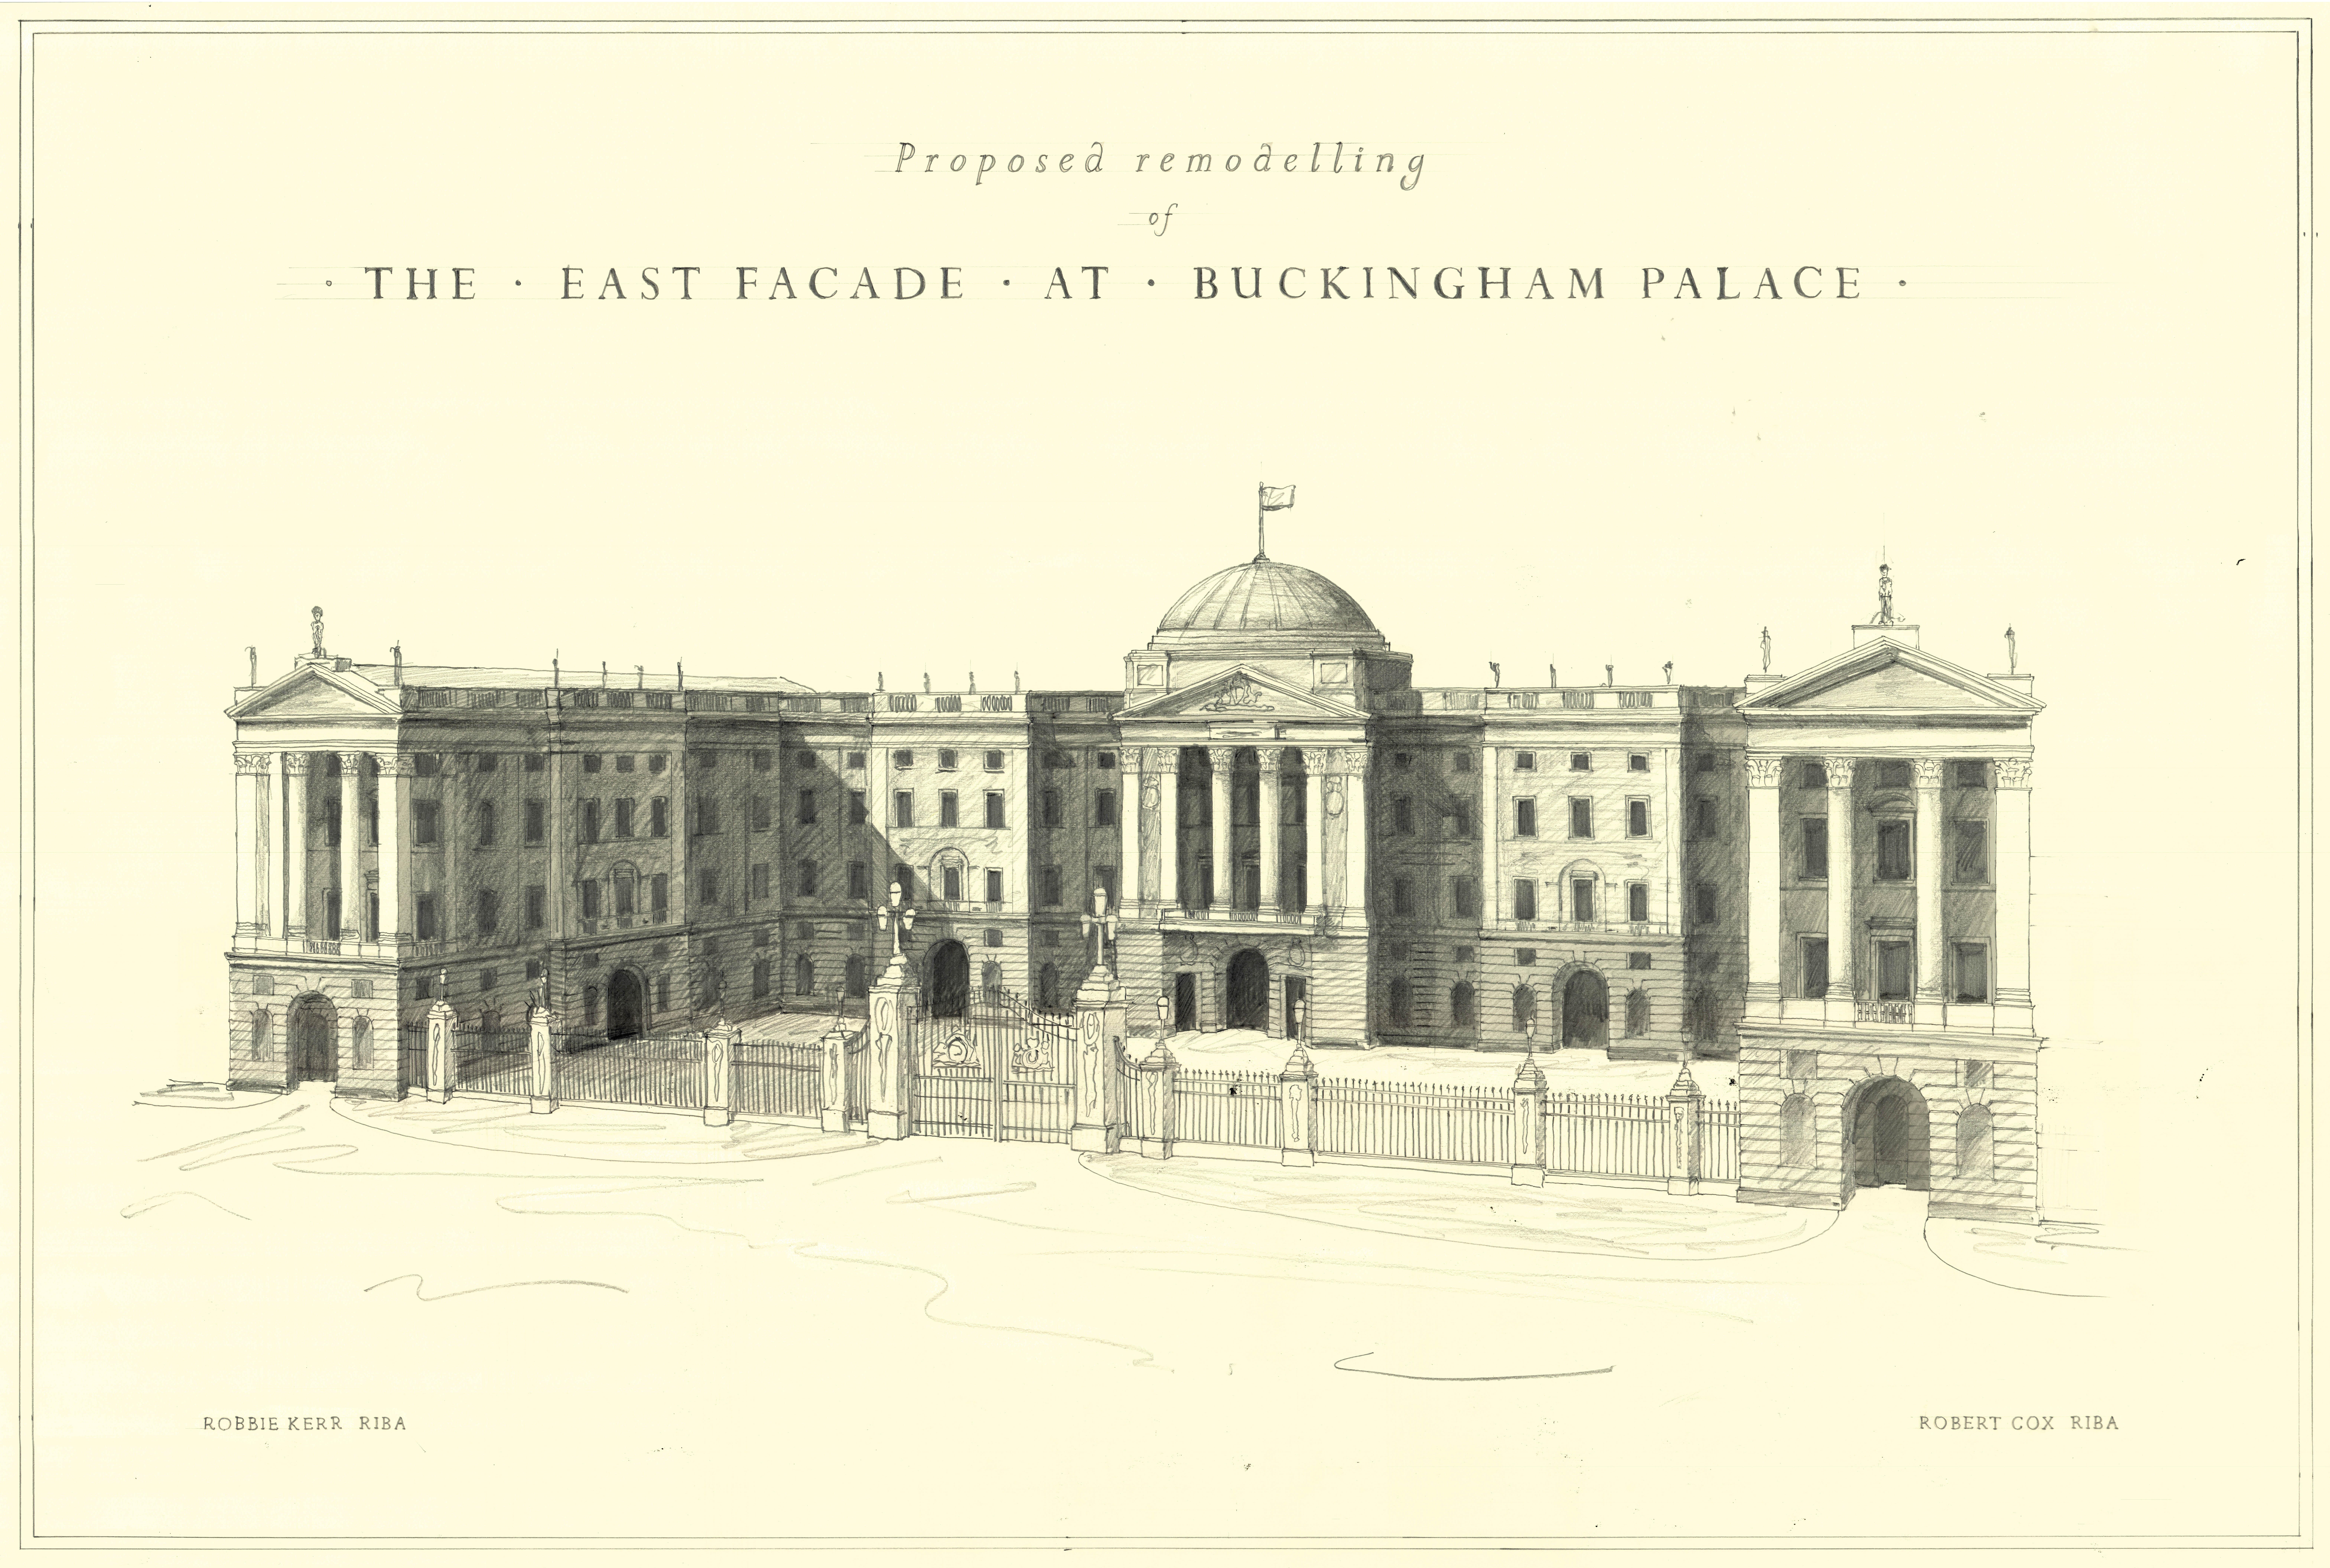 Robert Kerr and Robert Cox's remodelling of the East Facade